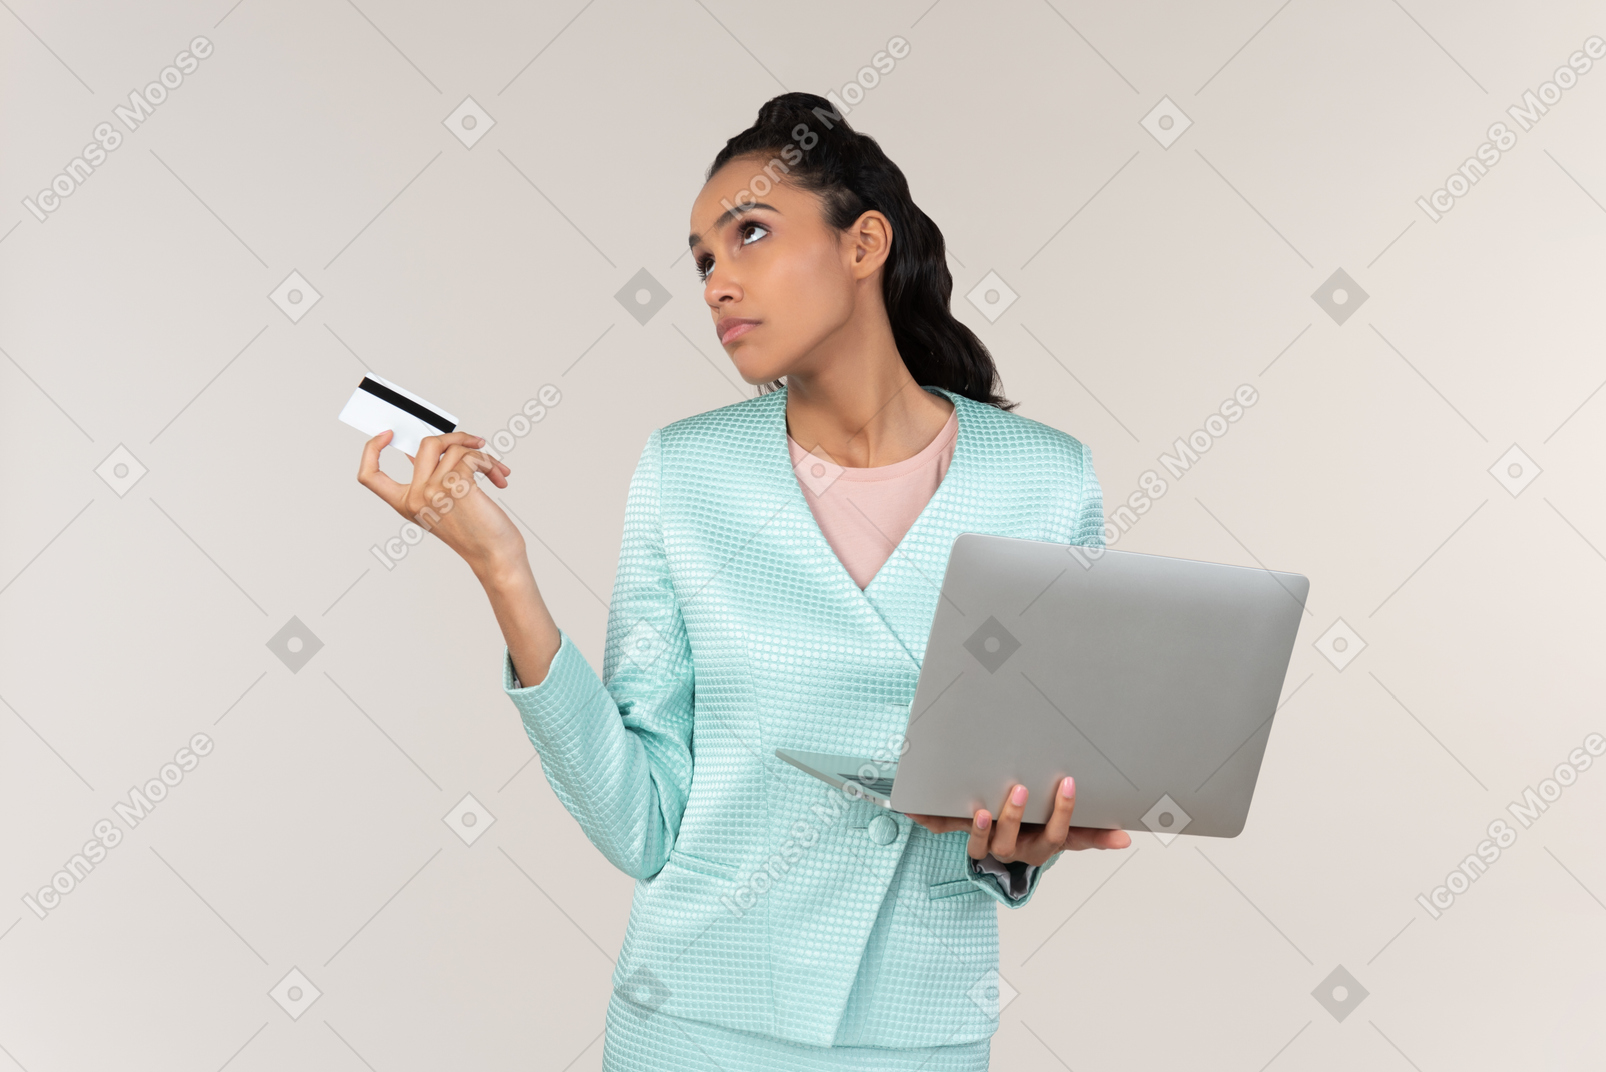 Pensive young afrowoman holding laptop and bank card